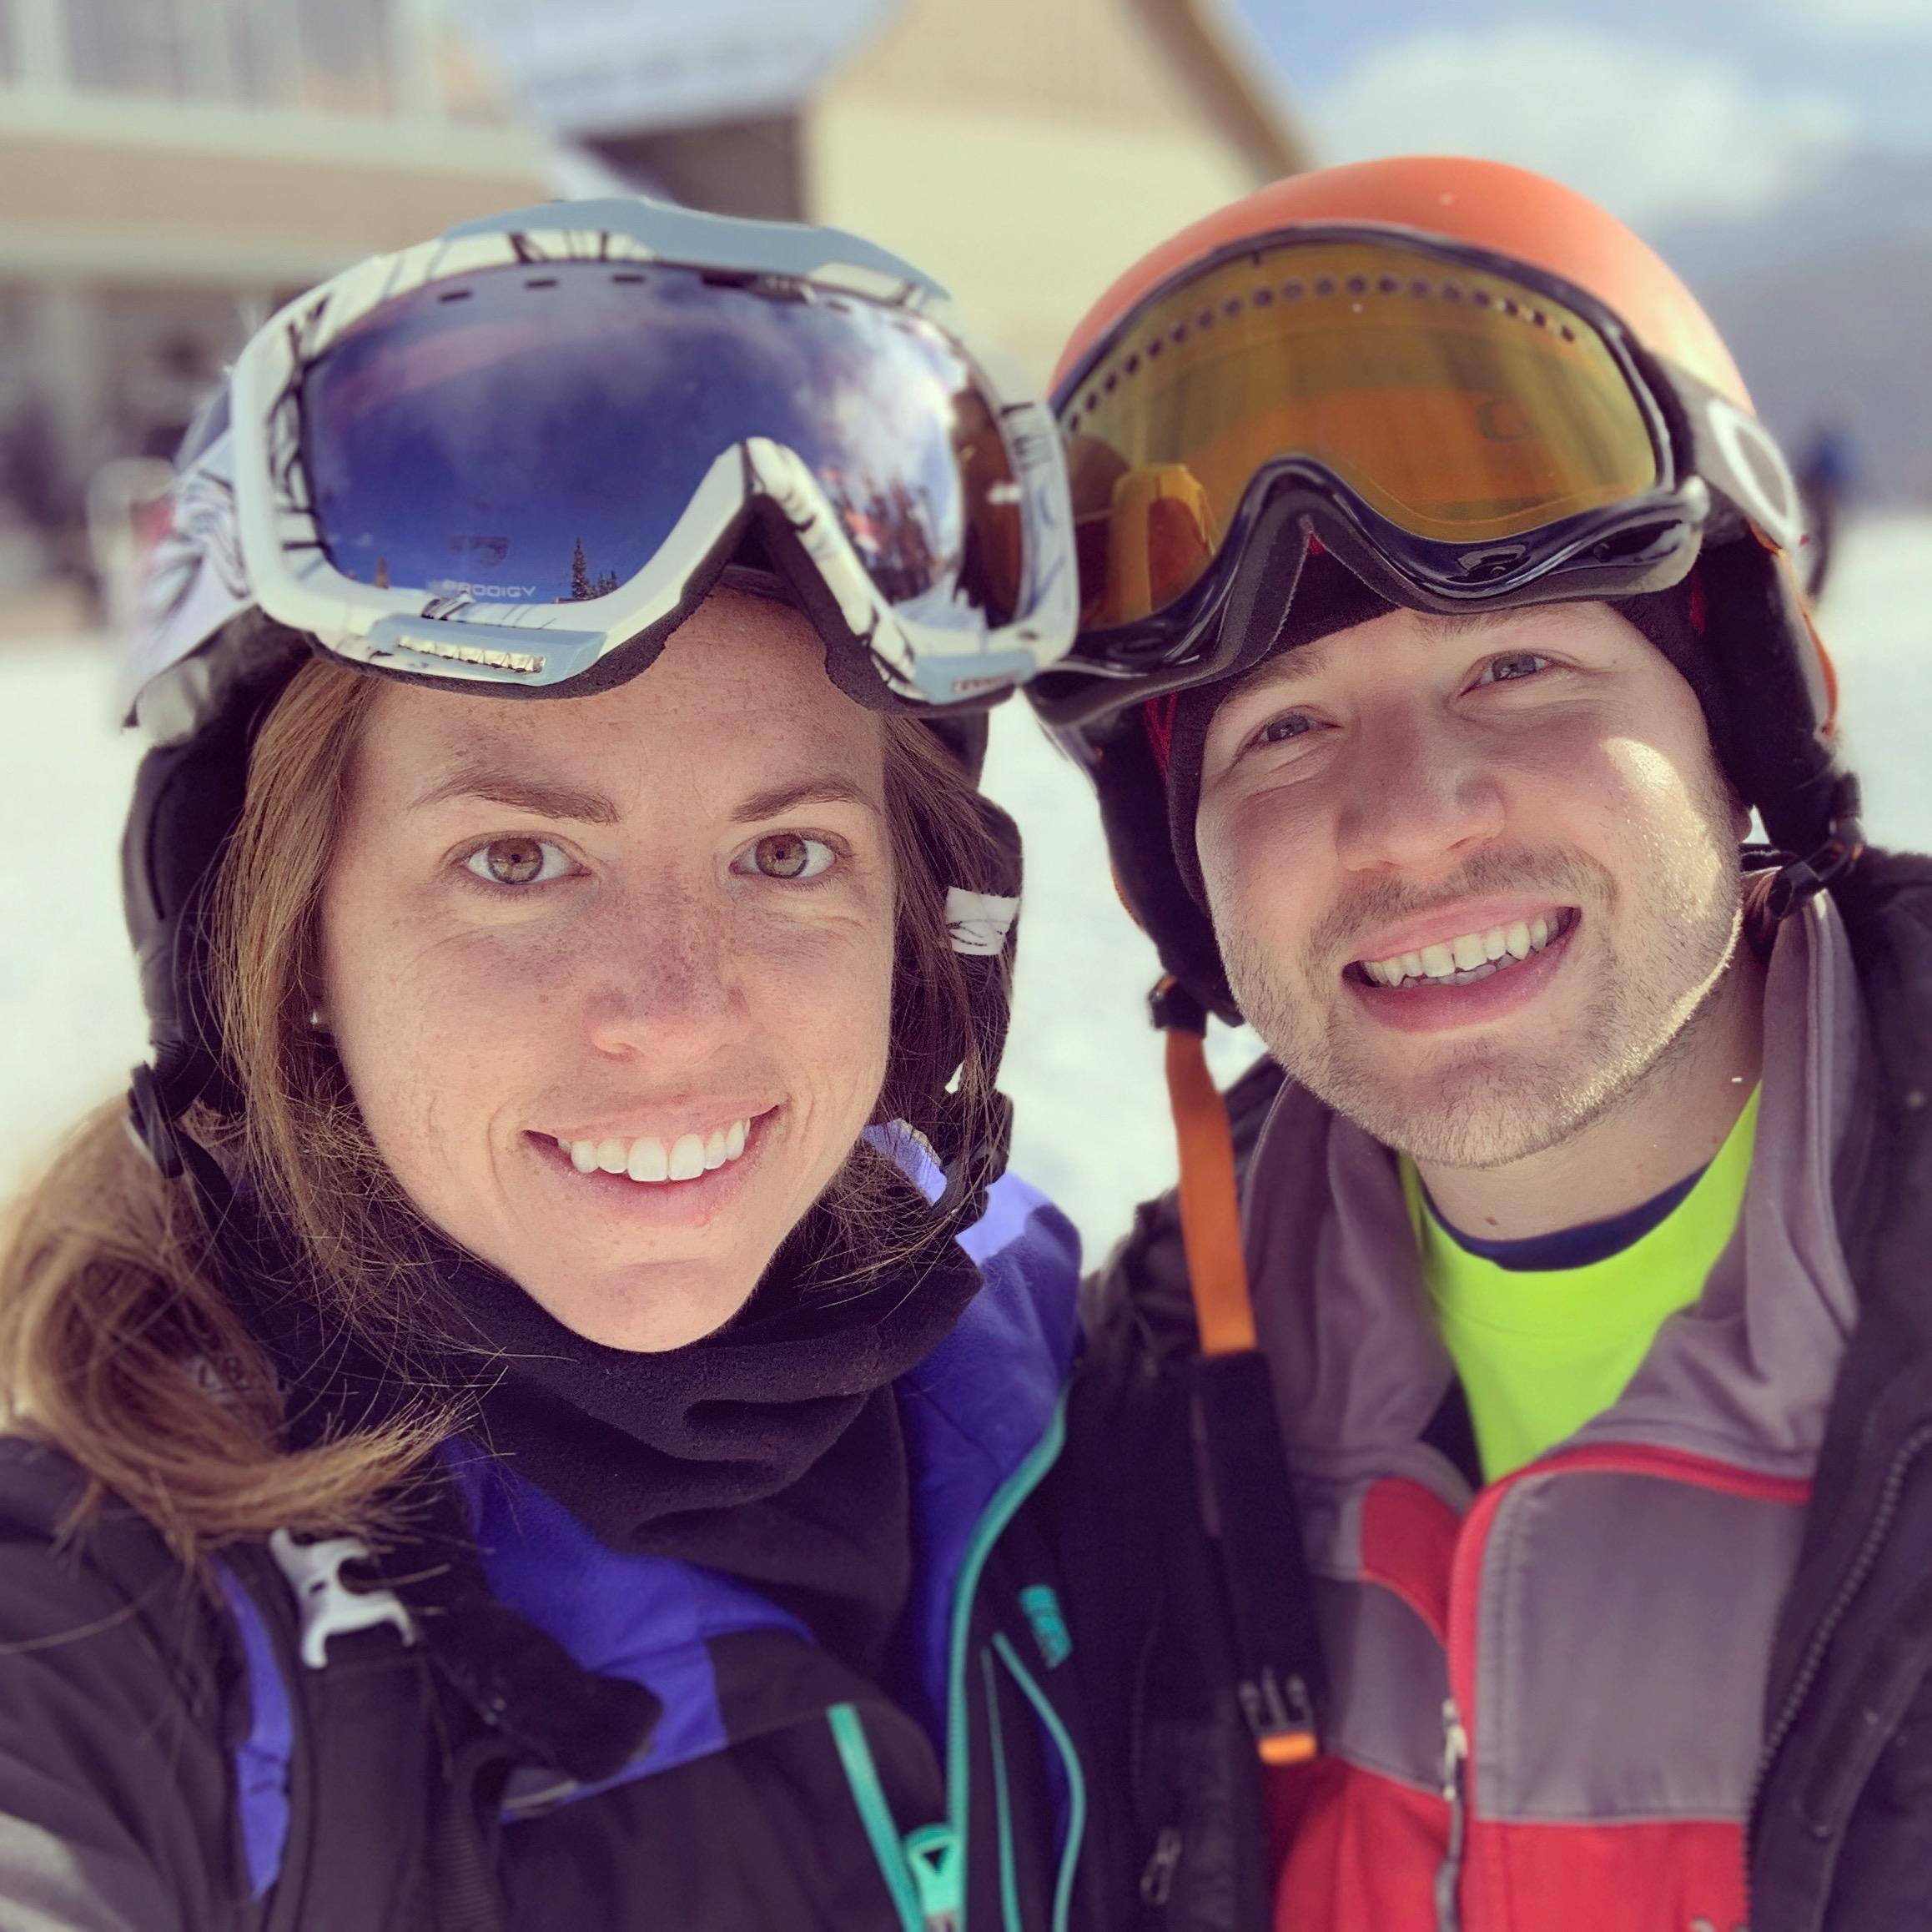 1st trip together - skiing in Colorado for New Years 2020!